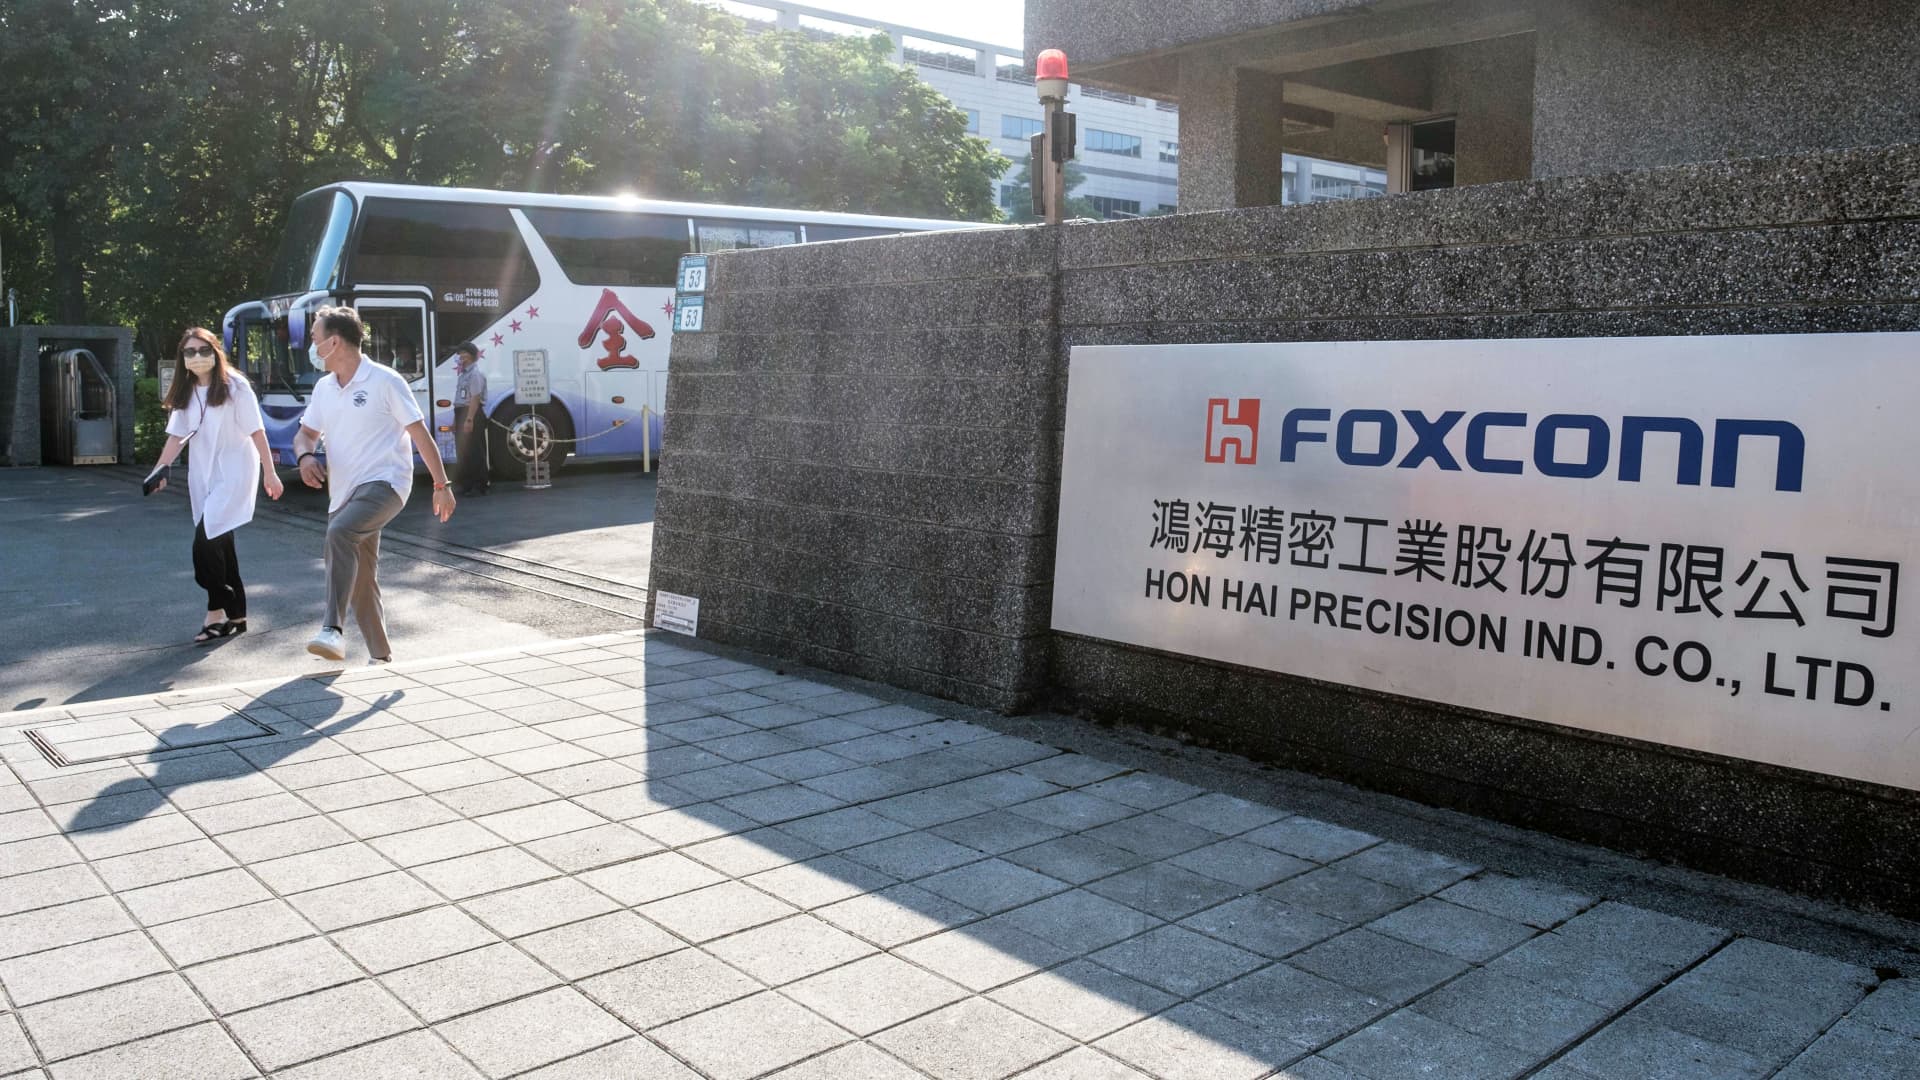 Apple supplier Foxconn cautious on outlook as smartphone sales slow - CNBC